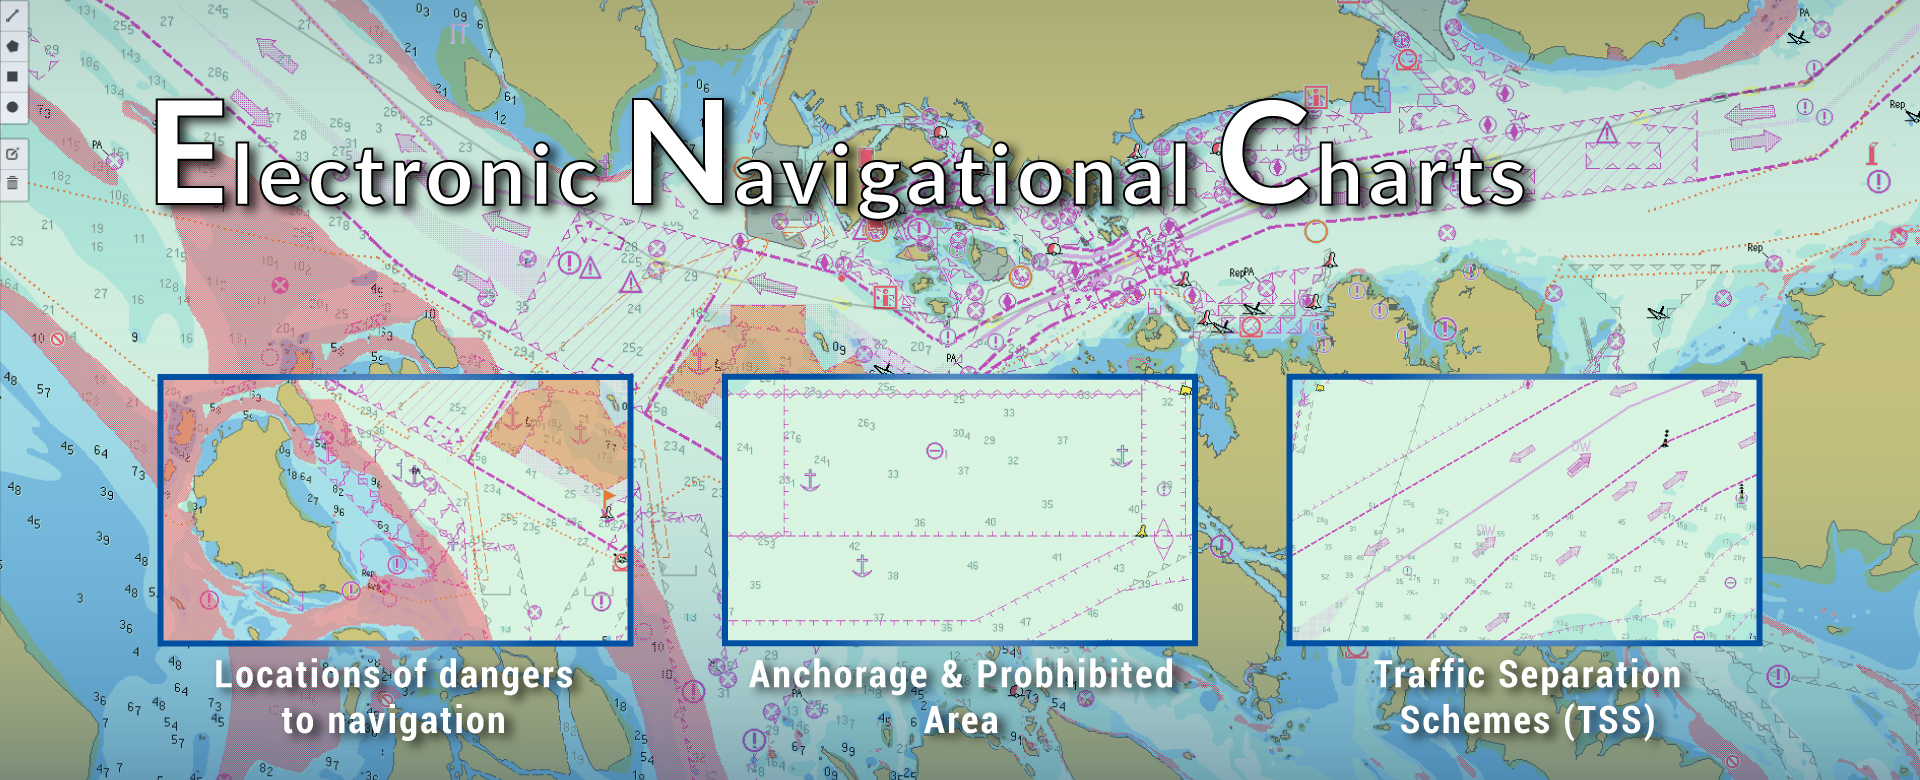 The Electronic Nautical Chart require no need for any installation or download updates, our service streamlines charts and automatically updates through web-based tracking platform, Falcon Mega Track (FMT), leaving you free to focus on navigation with peace of mind. An Electronic Navigational Chart includes a variety of features and information such as coastlines, depth soundings, navigational hazards, traffic separation schemes, bathymetry, buoys, lights, submarine cables, wind parks, etc, and other information that can help mariners navigate safely on the water.